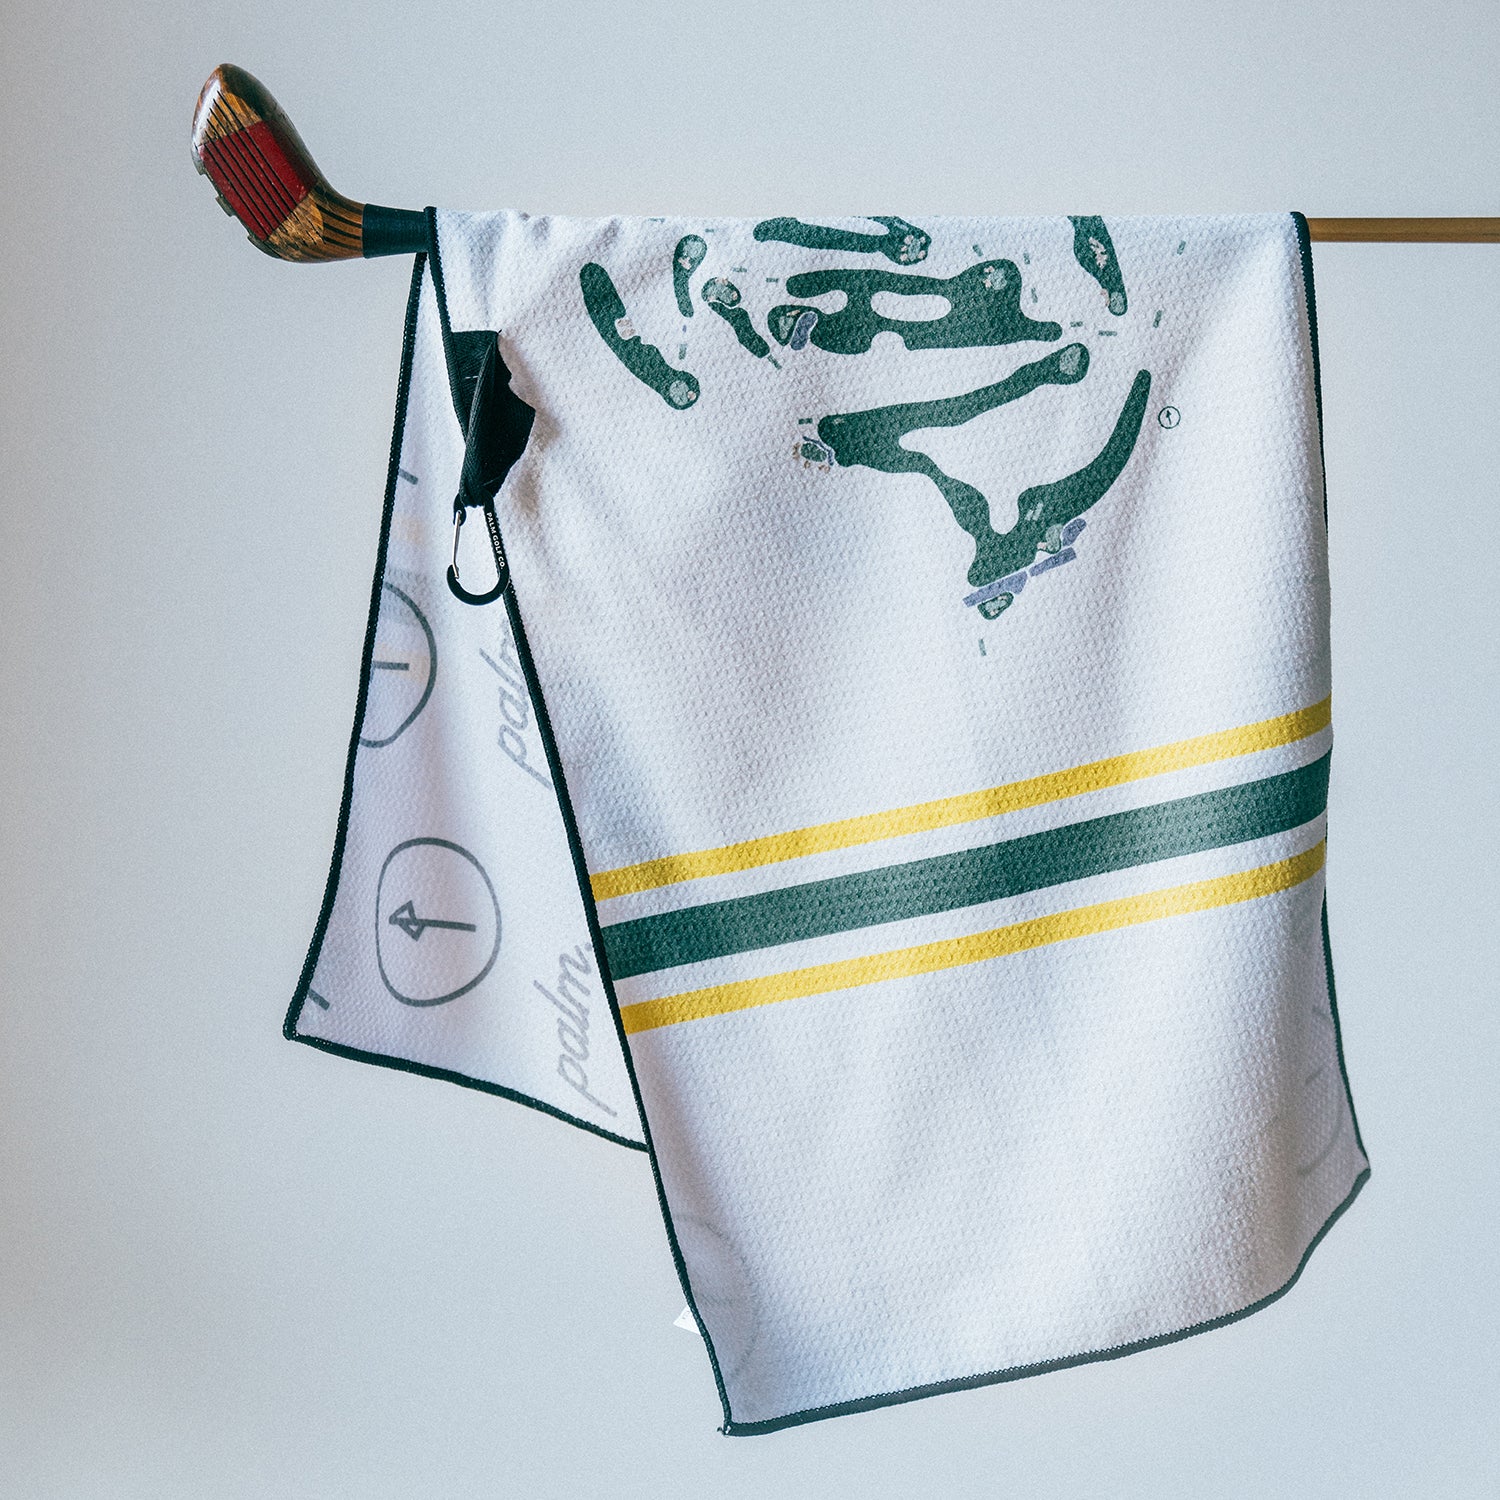 Tradition Towel - Palm Golf Co.